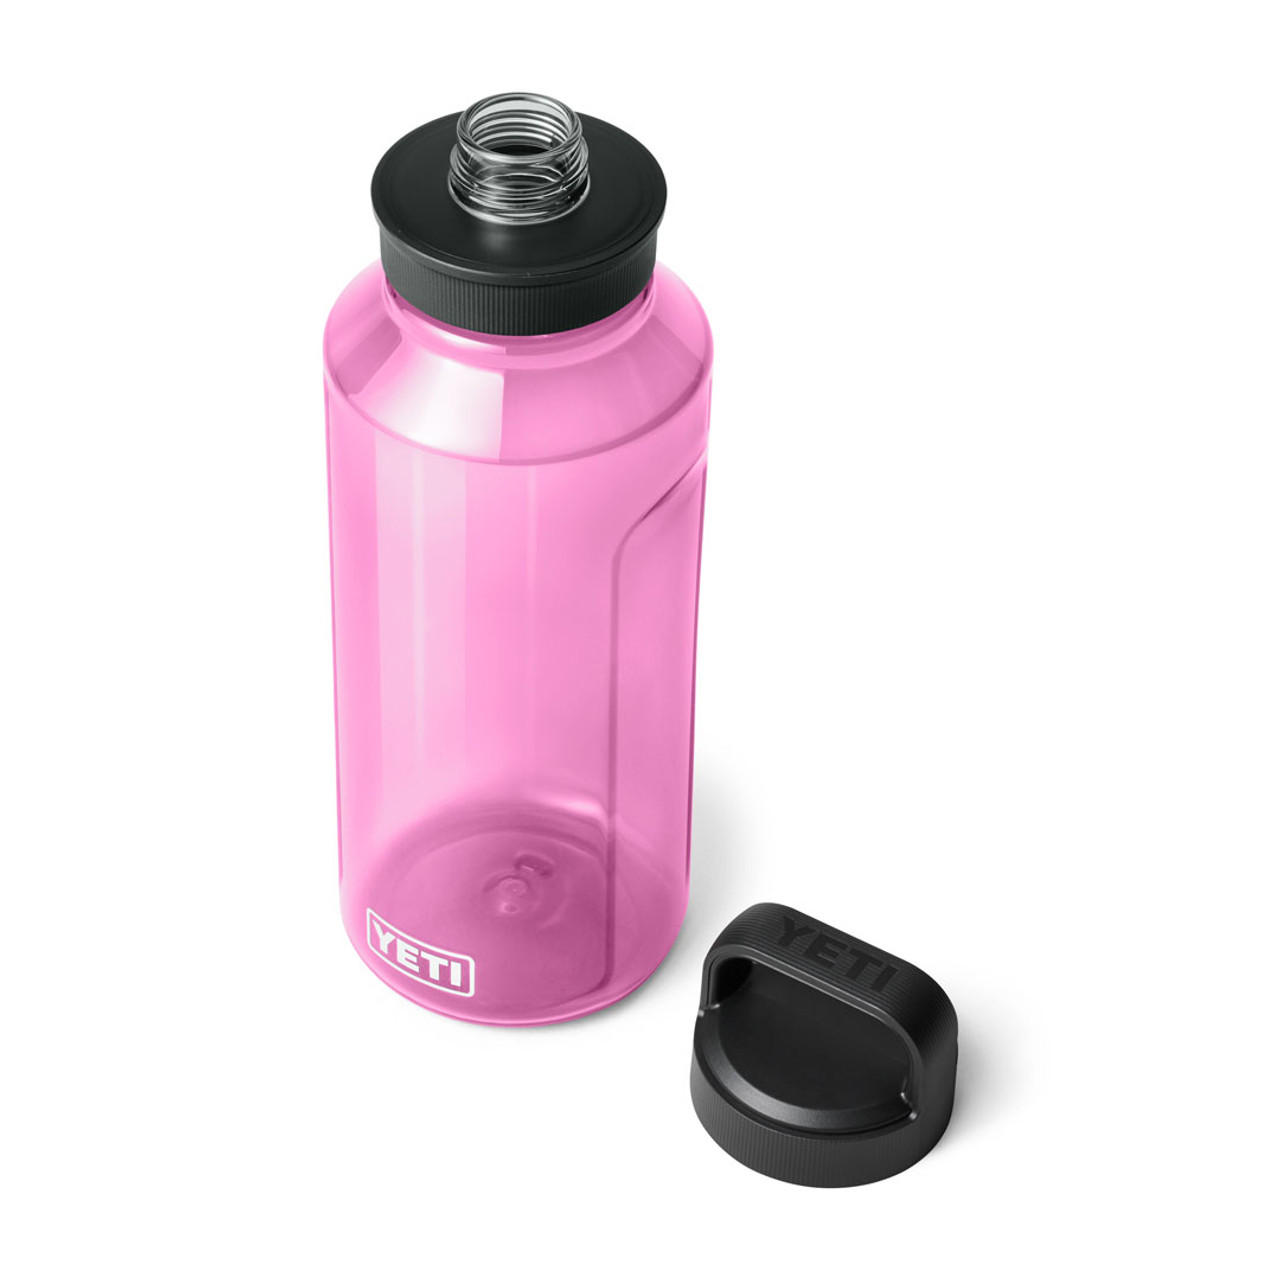 https://cdn11.bigcommerce.com/s-ppsyskcavg/images/stencil/1280x1280/products/68676/248141/YETI_Wholesale_Drinkware_Yonder_1.5L_Power_Pink_3qtr_Lid_Off_12786_B_2400x2400__01273.1694635251.jpg?c=2?imbypass=on